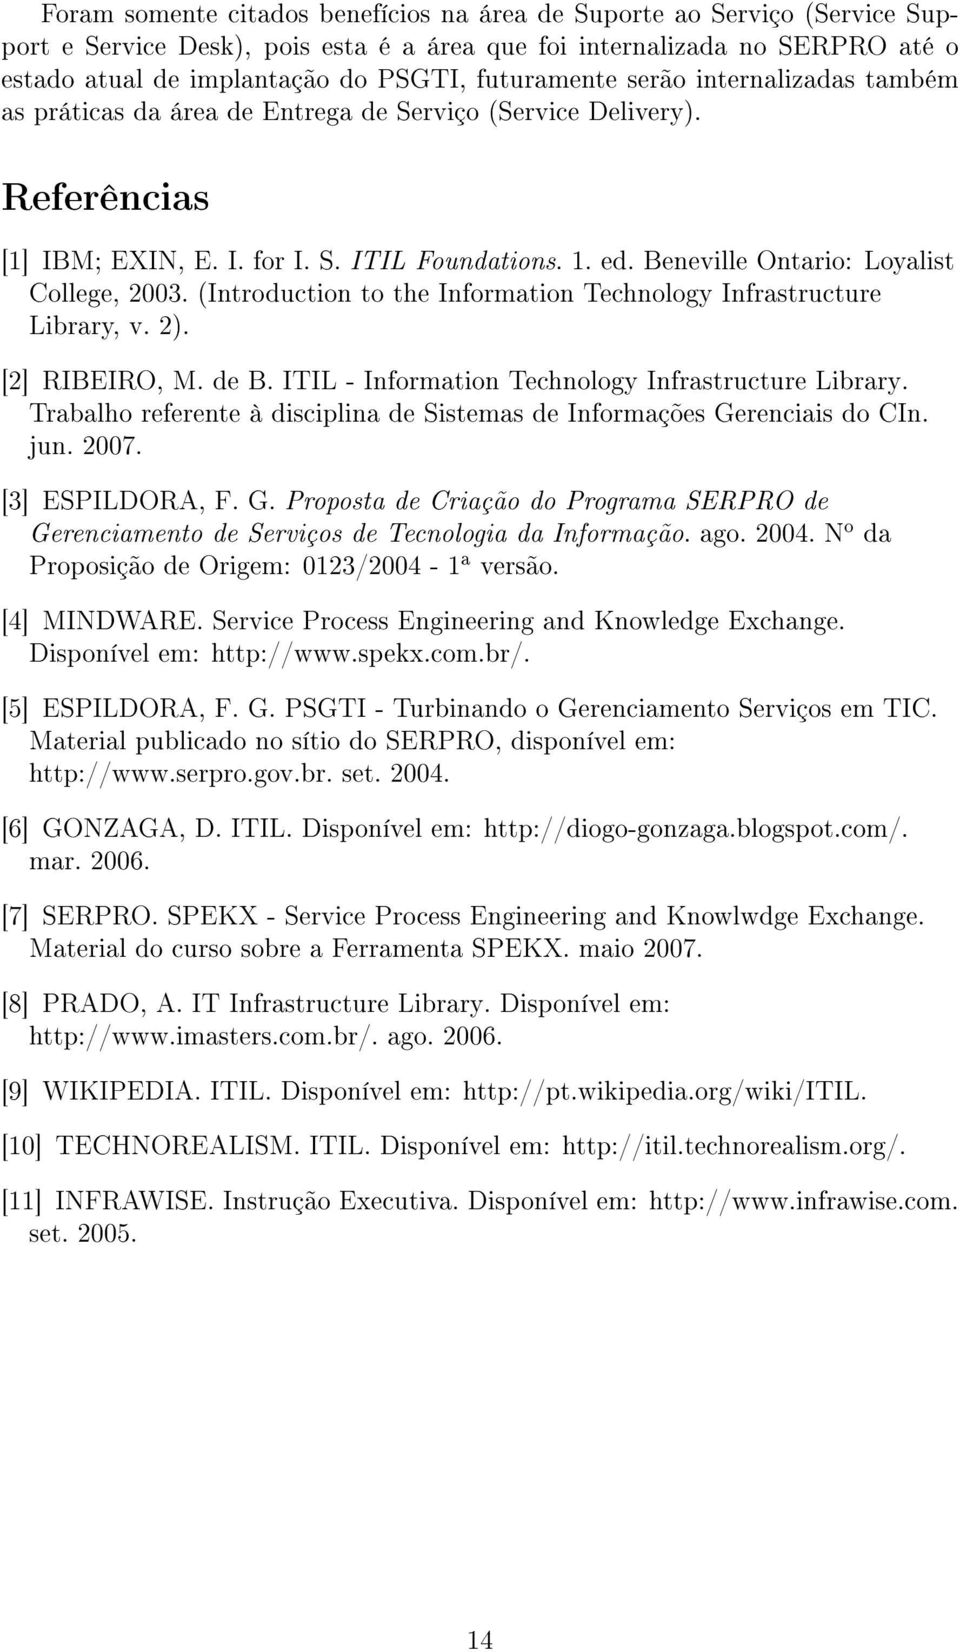 Beneville Ontario: Loyalist College, 2003. (Introduction to the Information Technology Infrastructure Library, v. 2). [2] RIBEIRO, M. de B. ITIL - Information Technology Infrastructure Library.